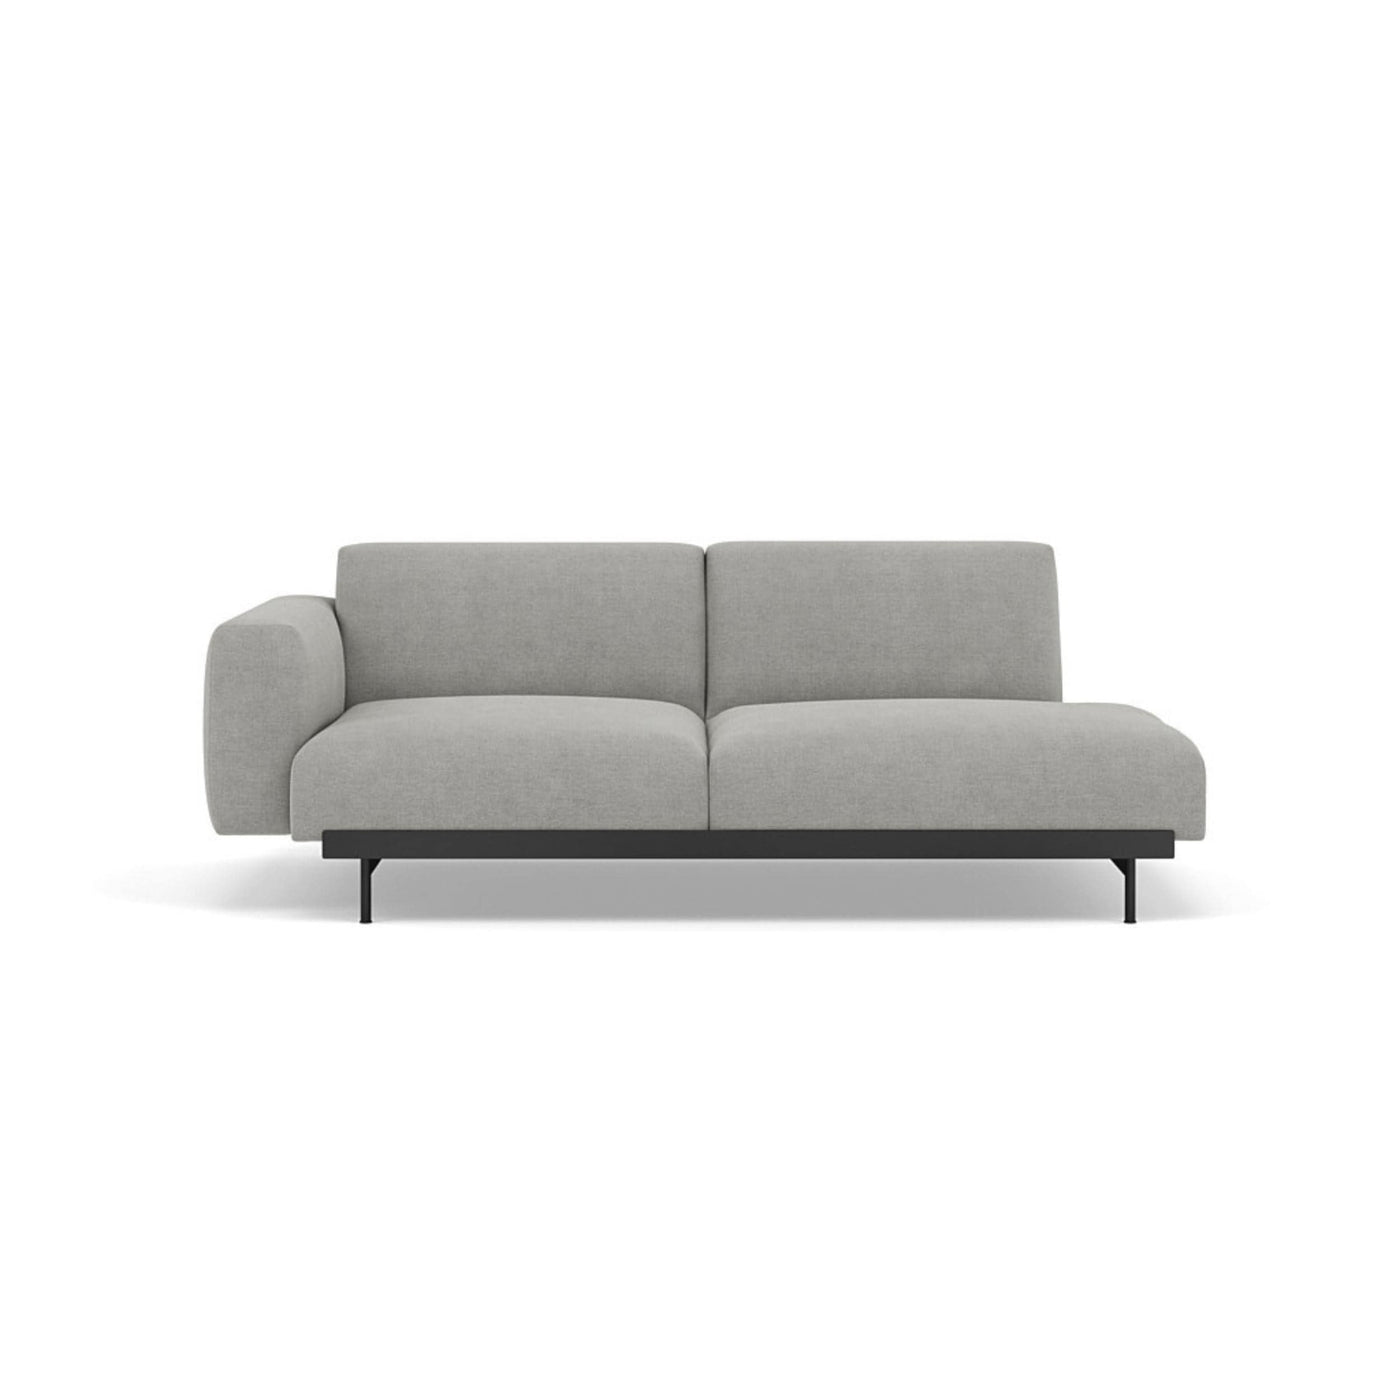 Muuto In Situ Modular 2 Seater Sofa, configuration 3. Made to order from someday designs #colour_fiord-151